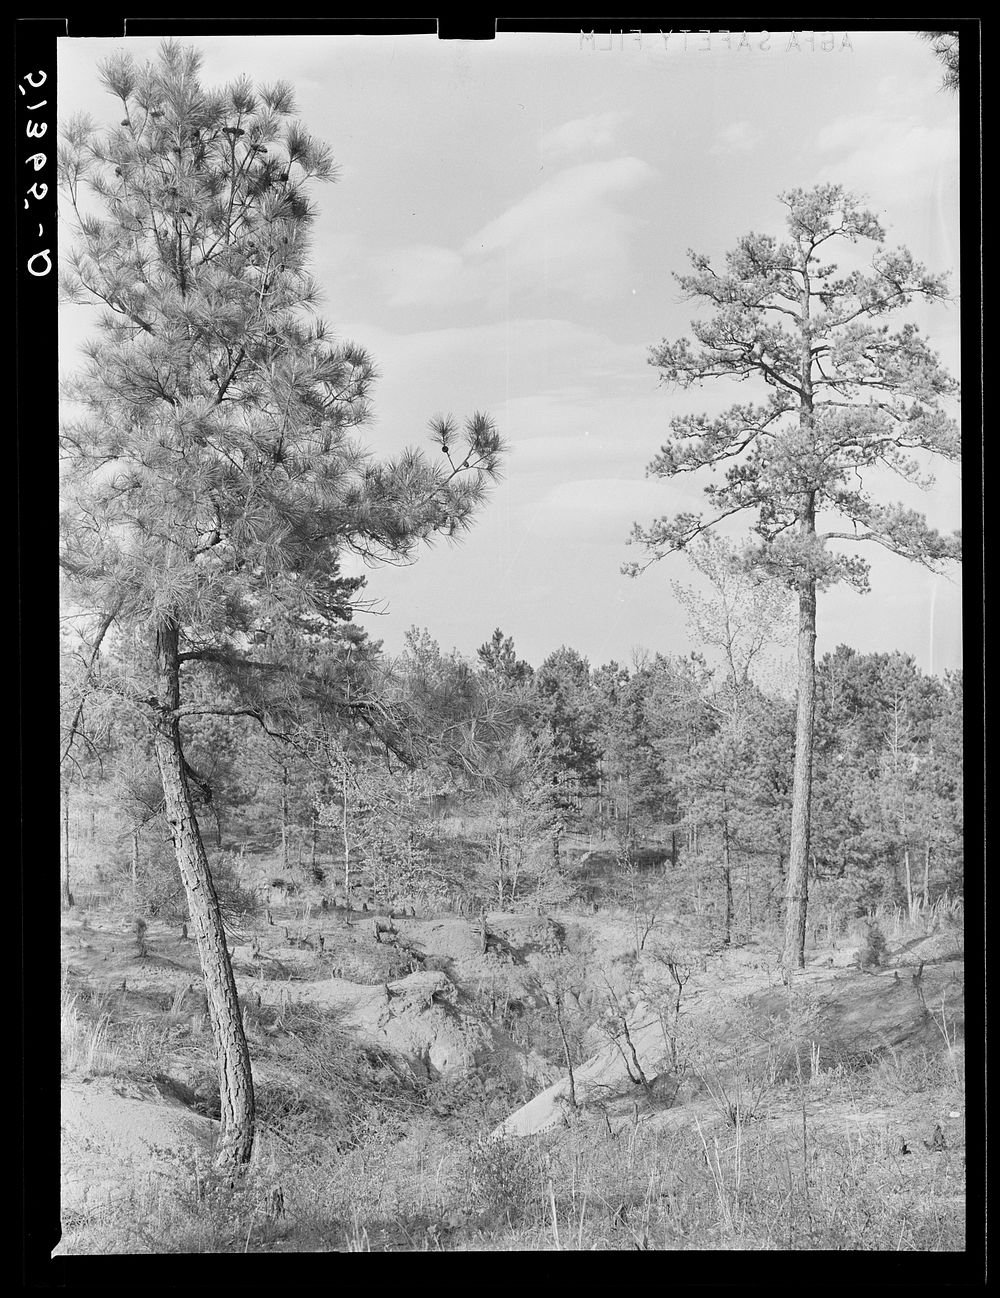 Gullied land and pine trees near Atlanta, Georgia. Sourced from the Library of Congress.